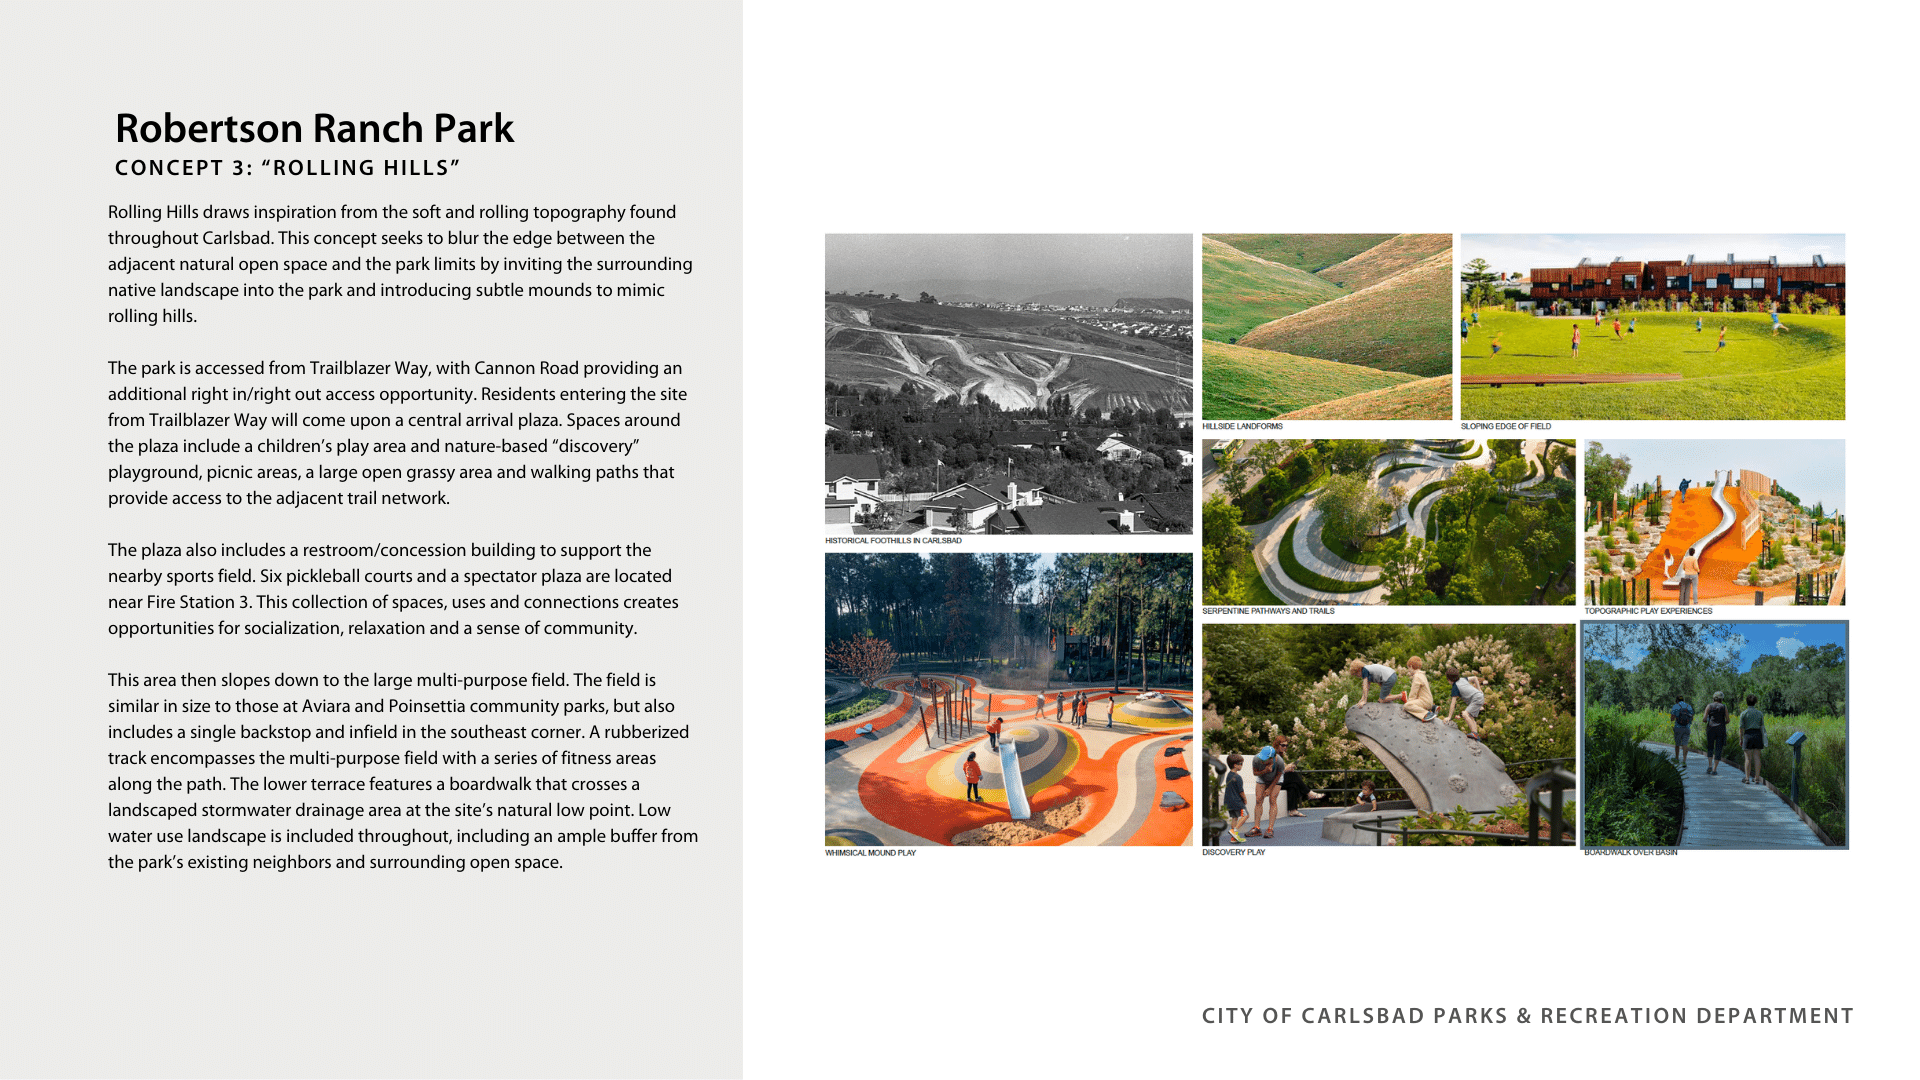 An overview image highlights the inspiration behind the Rolling Hills design concept. The description reads as follows: